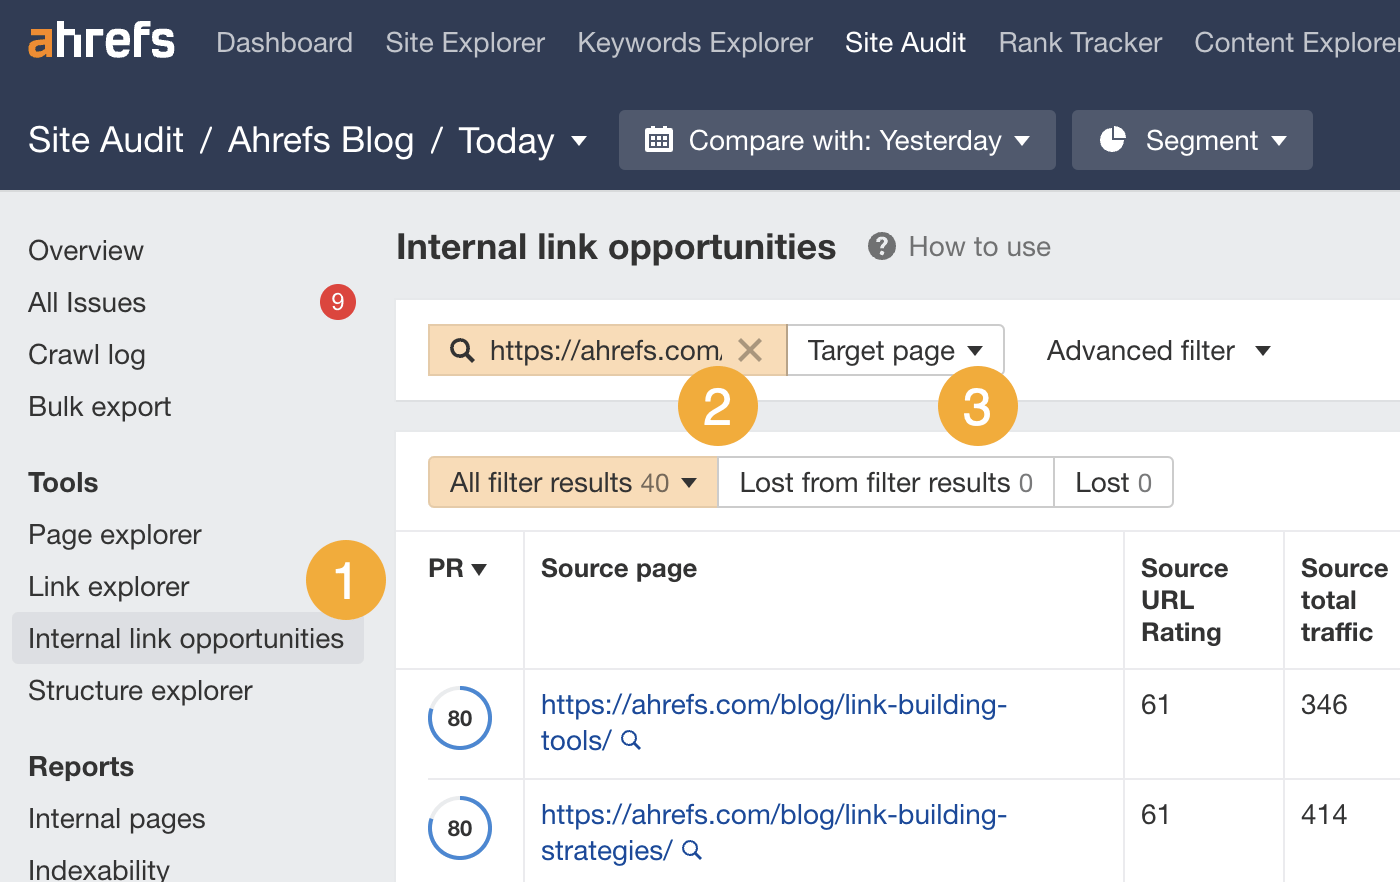 Finding internal linking opportunities in Ahrefs